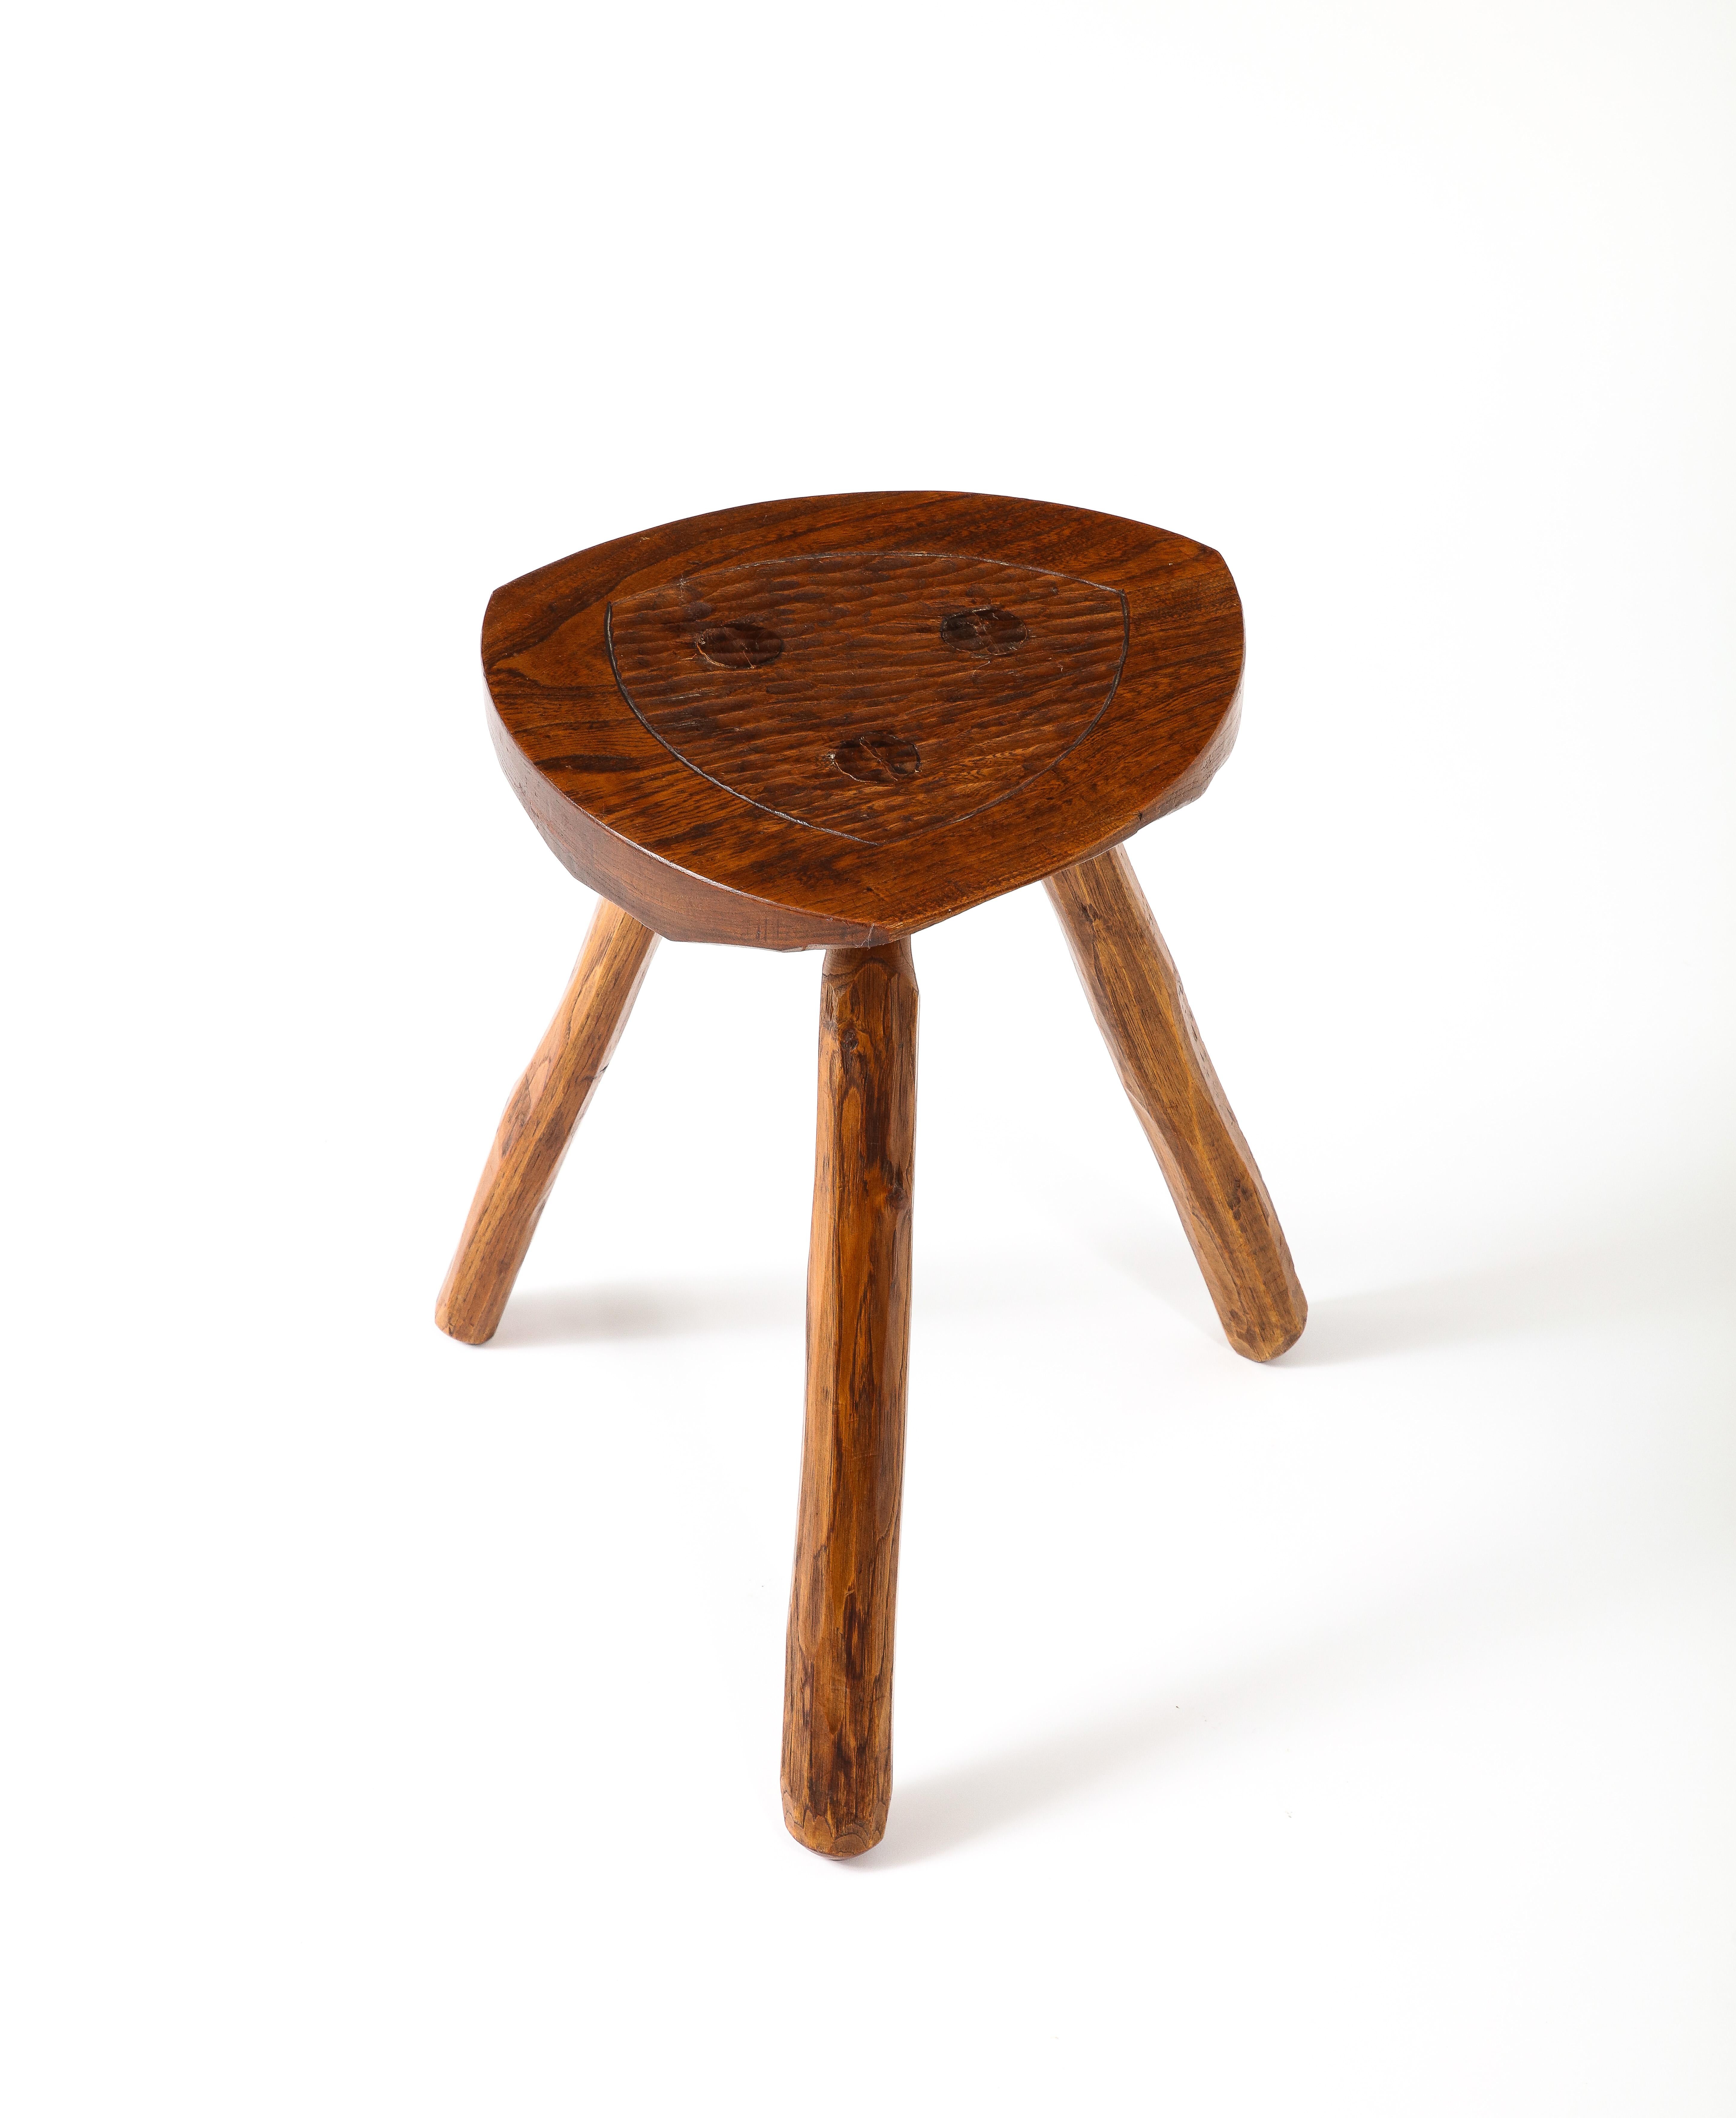 Mid-Century Modern Triangular Stool in the Style of Marolles, France 1950